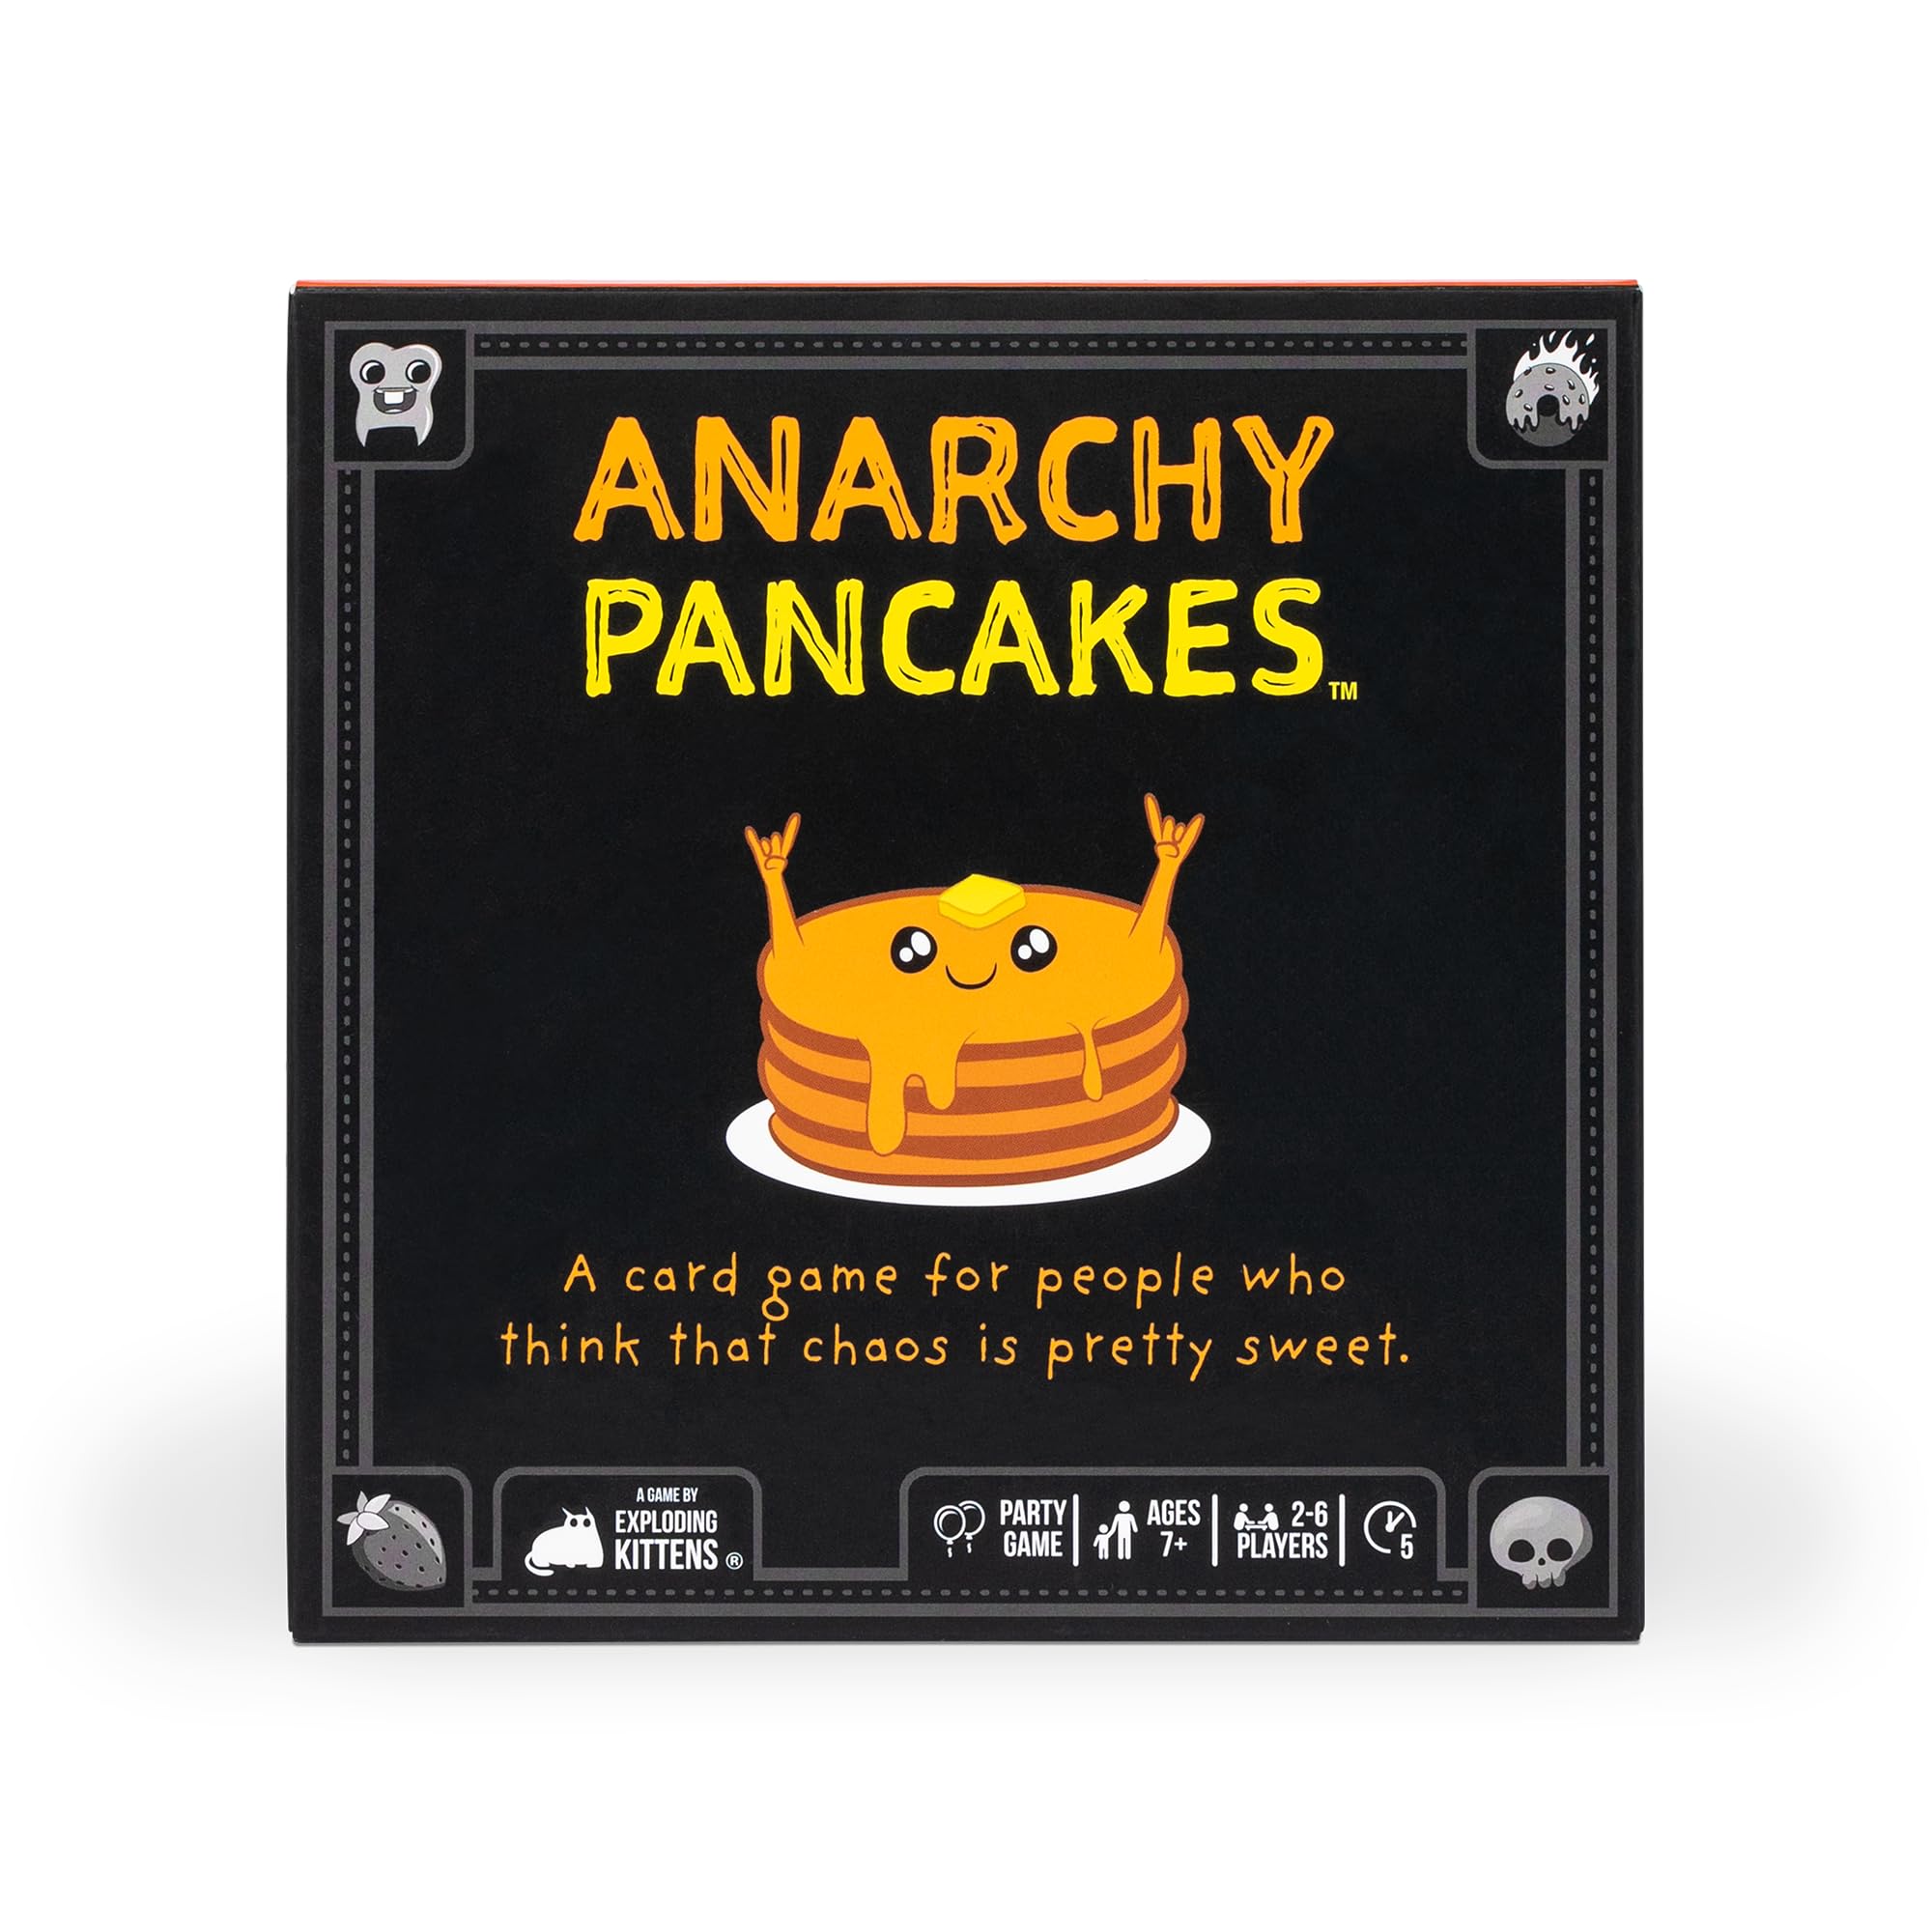 Exploding Kittens Anarchy Pancakes Strategic Card Game with Chaotic Game Parts Included - Illustrated Board Game for Kids and Families